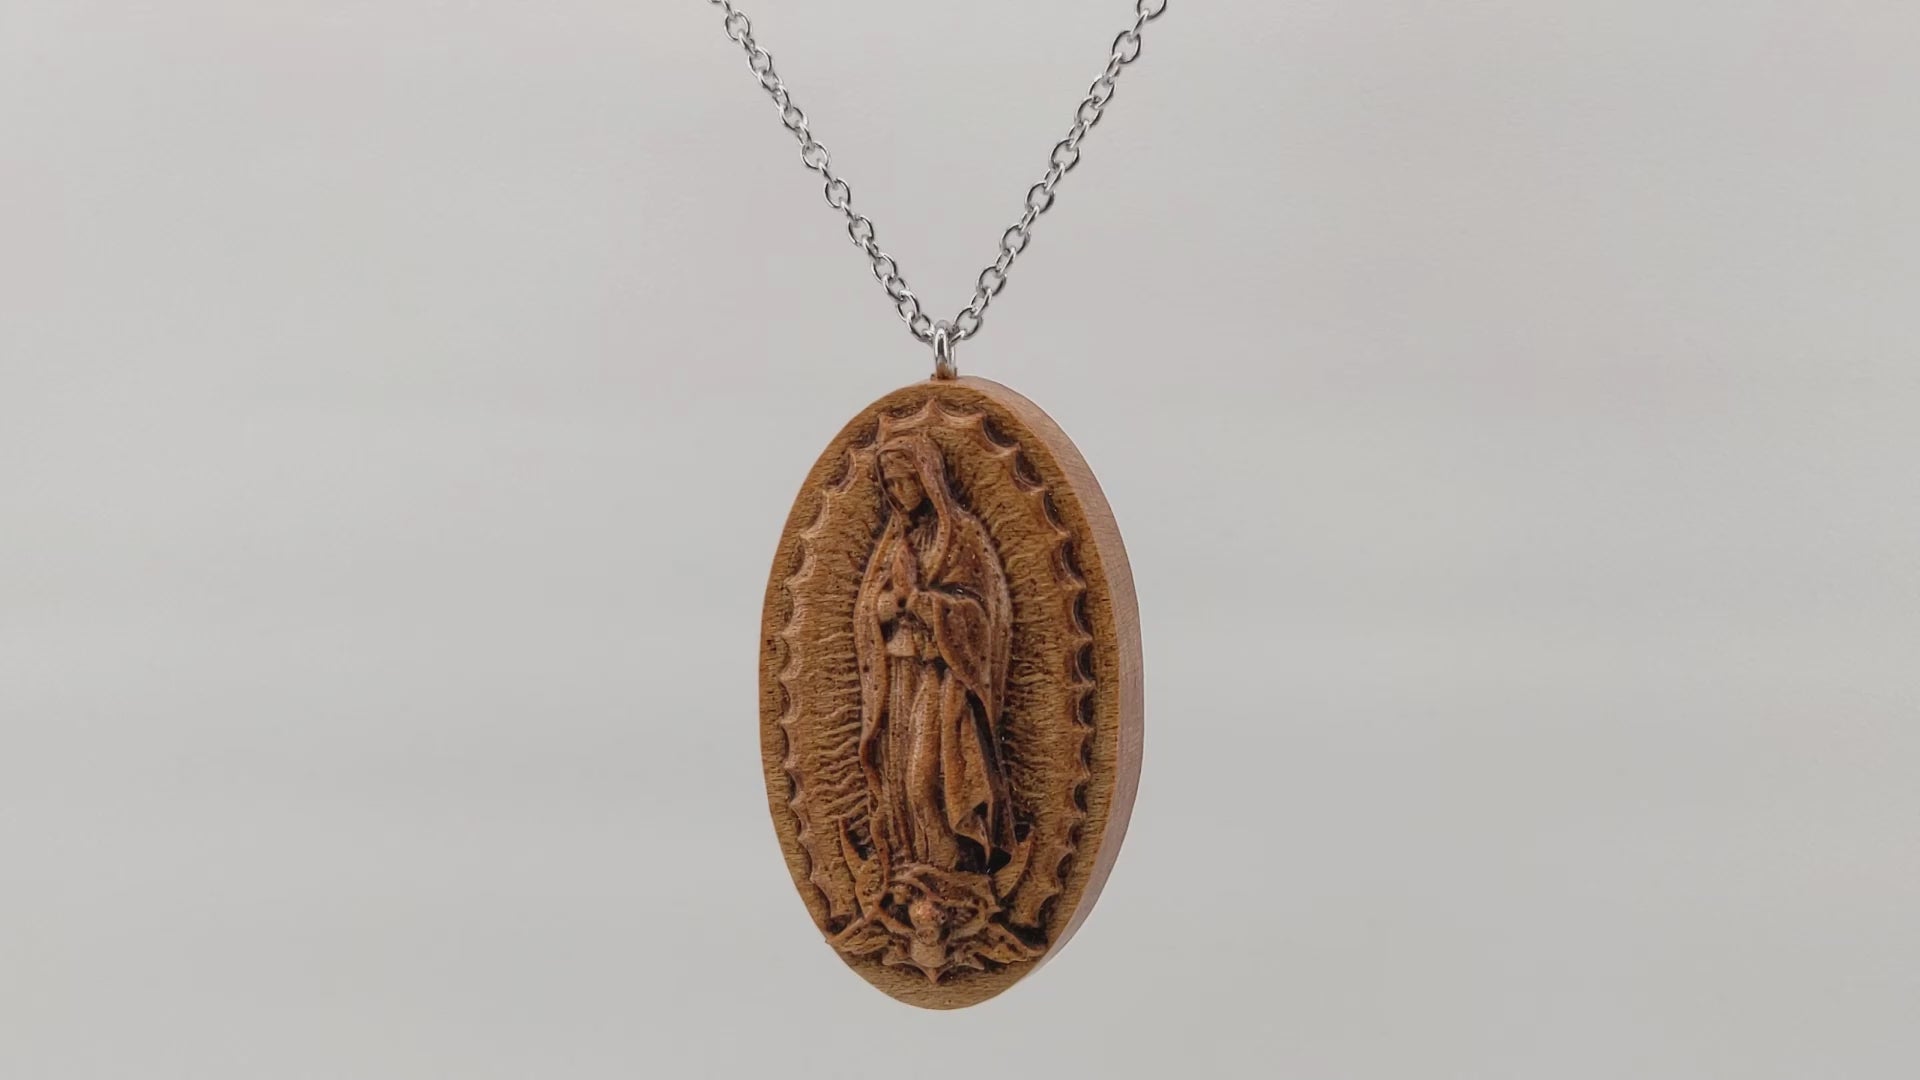 Wooden necklace pendant carved in the shape of Guadalupe. Made from hard maple wood. Hanging and rotating from a silver stainless steel chain against a white background.